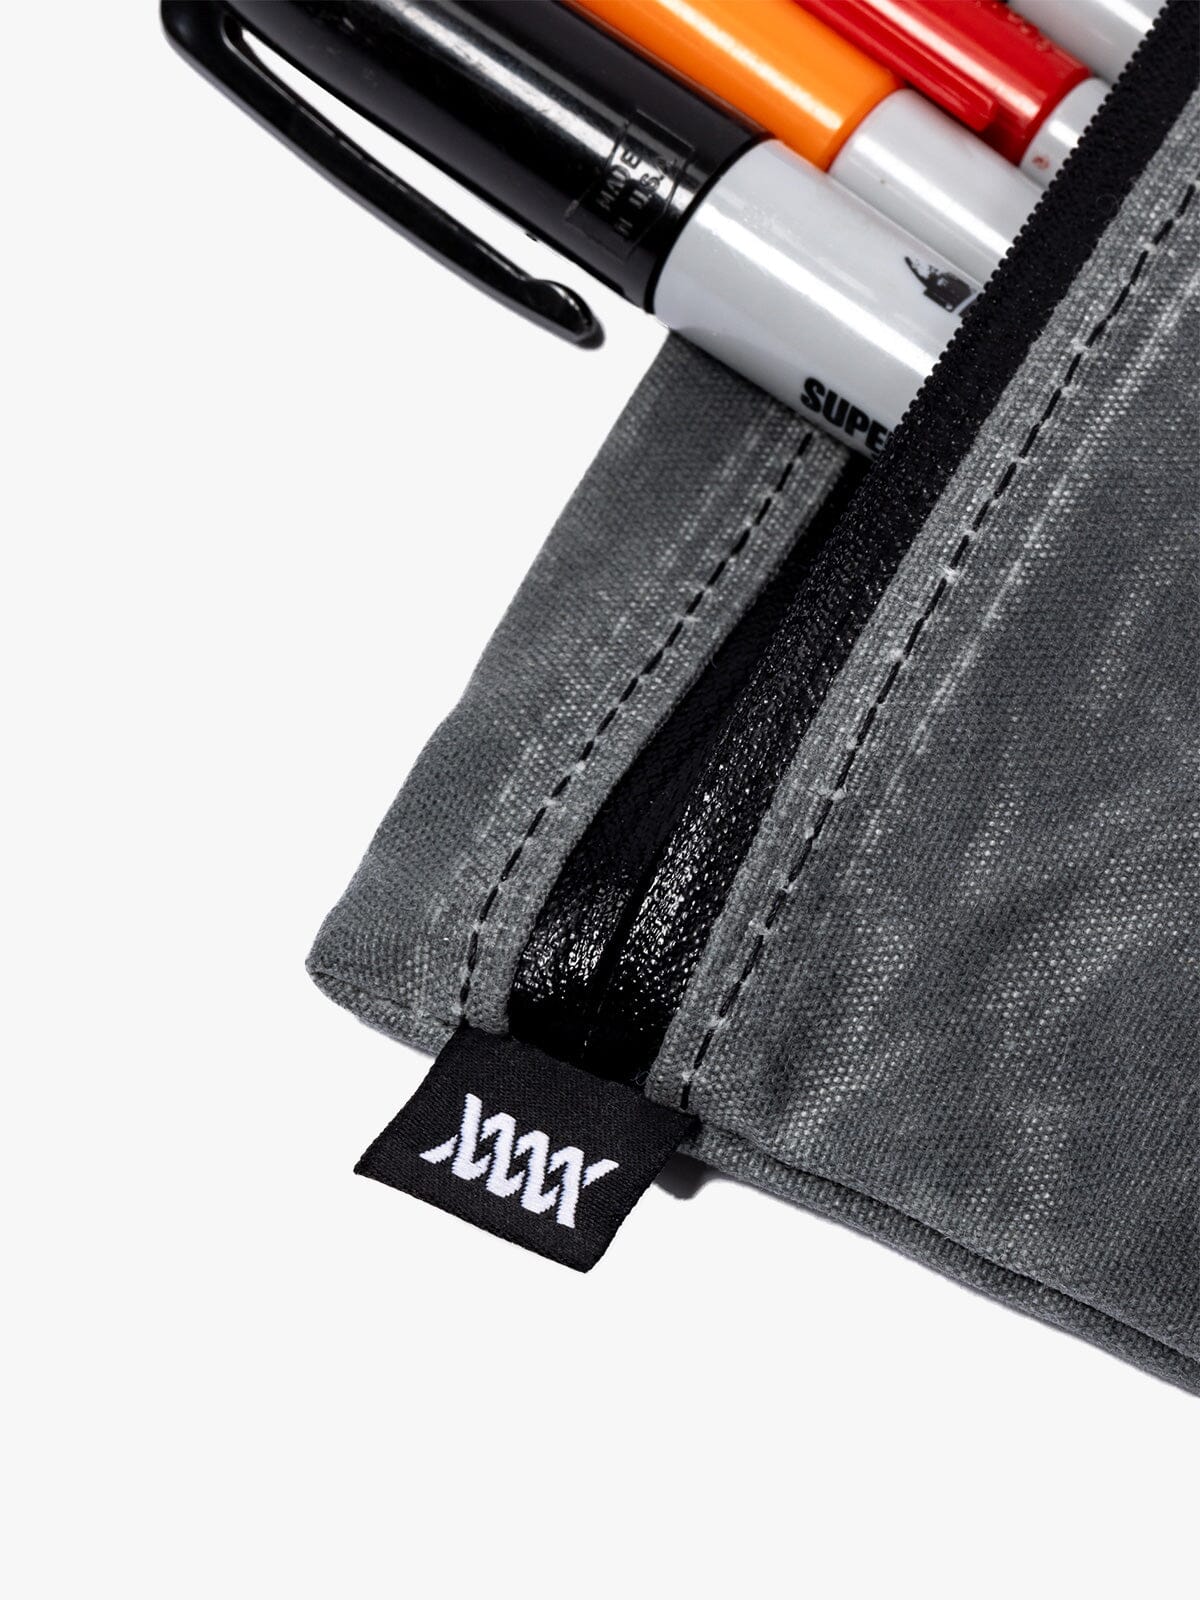 Waxed Canvas Wallet & Utility Pouch by Mission Workshop - Weatherproof Bags & Technical Apparel - San Francisco & Los Angeles - Built to endure - Guaranteed forever